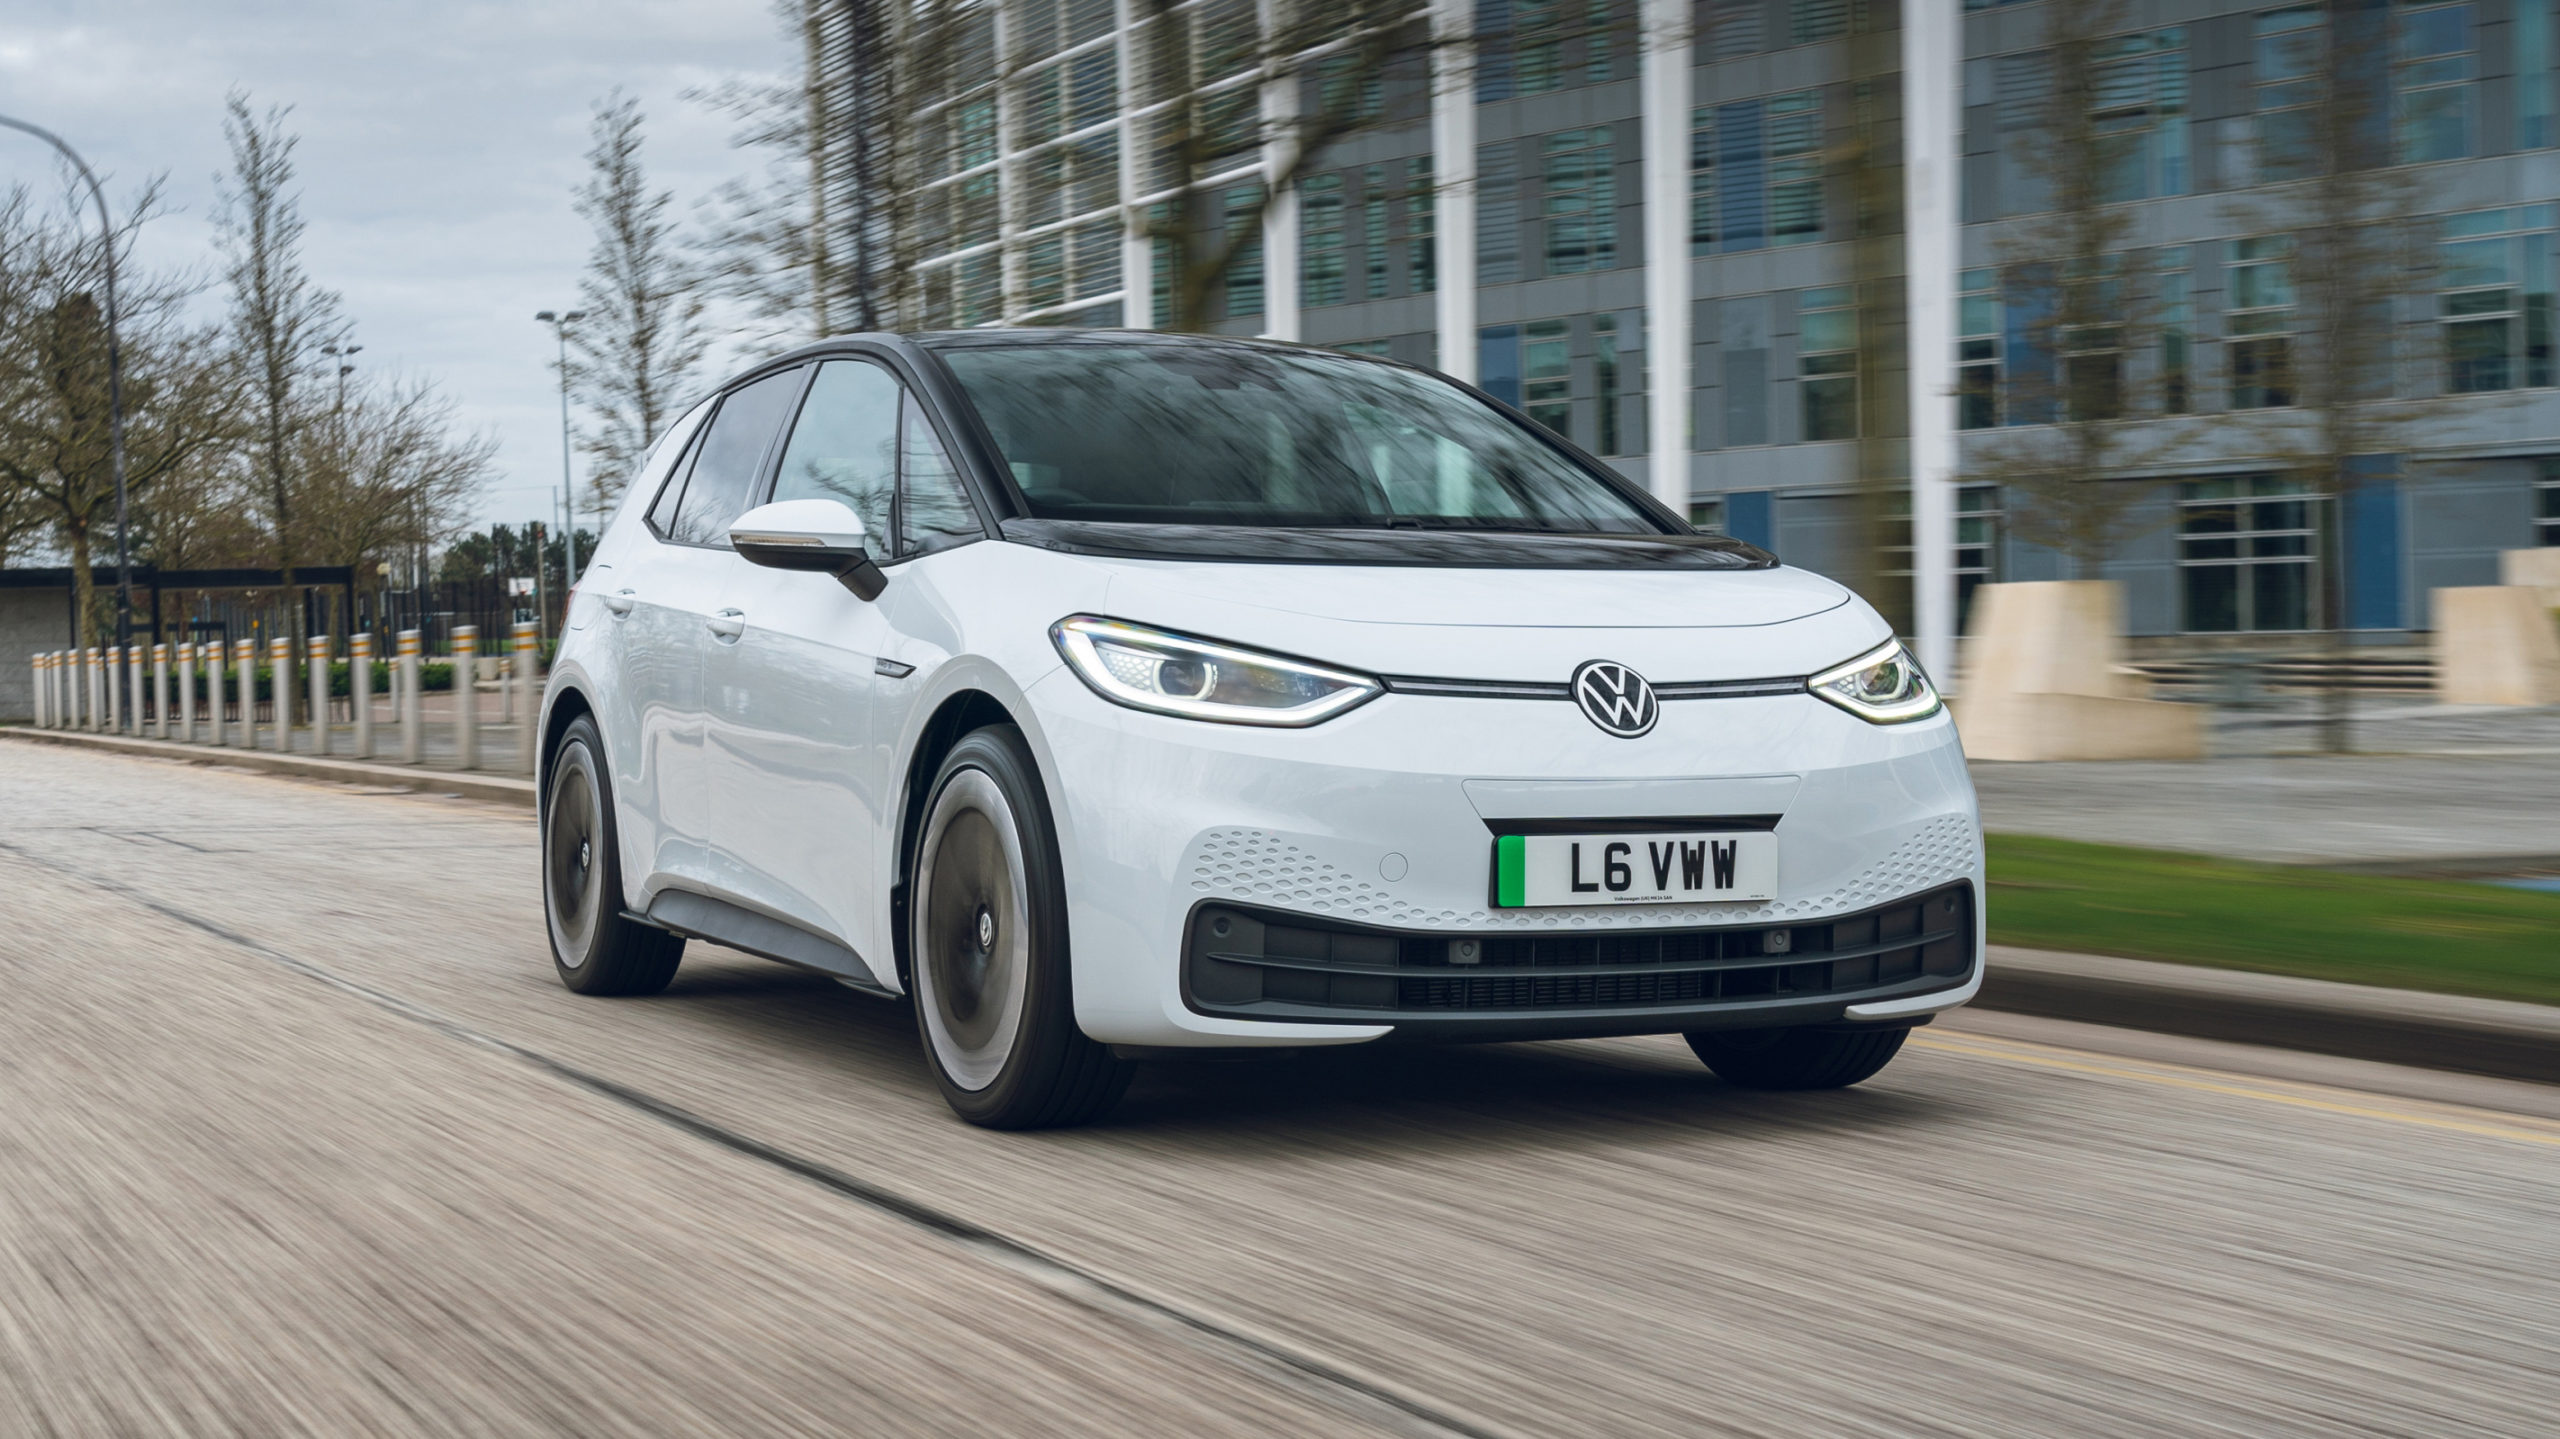 these are the 10 longest range evs for under £40k